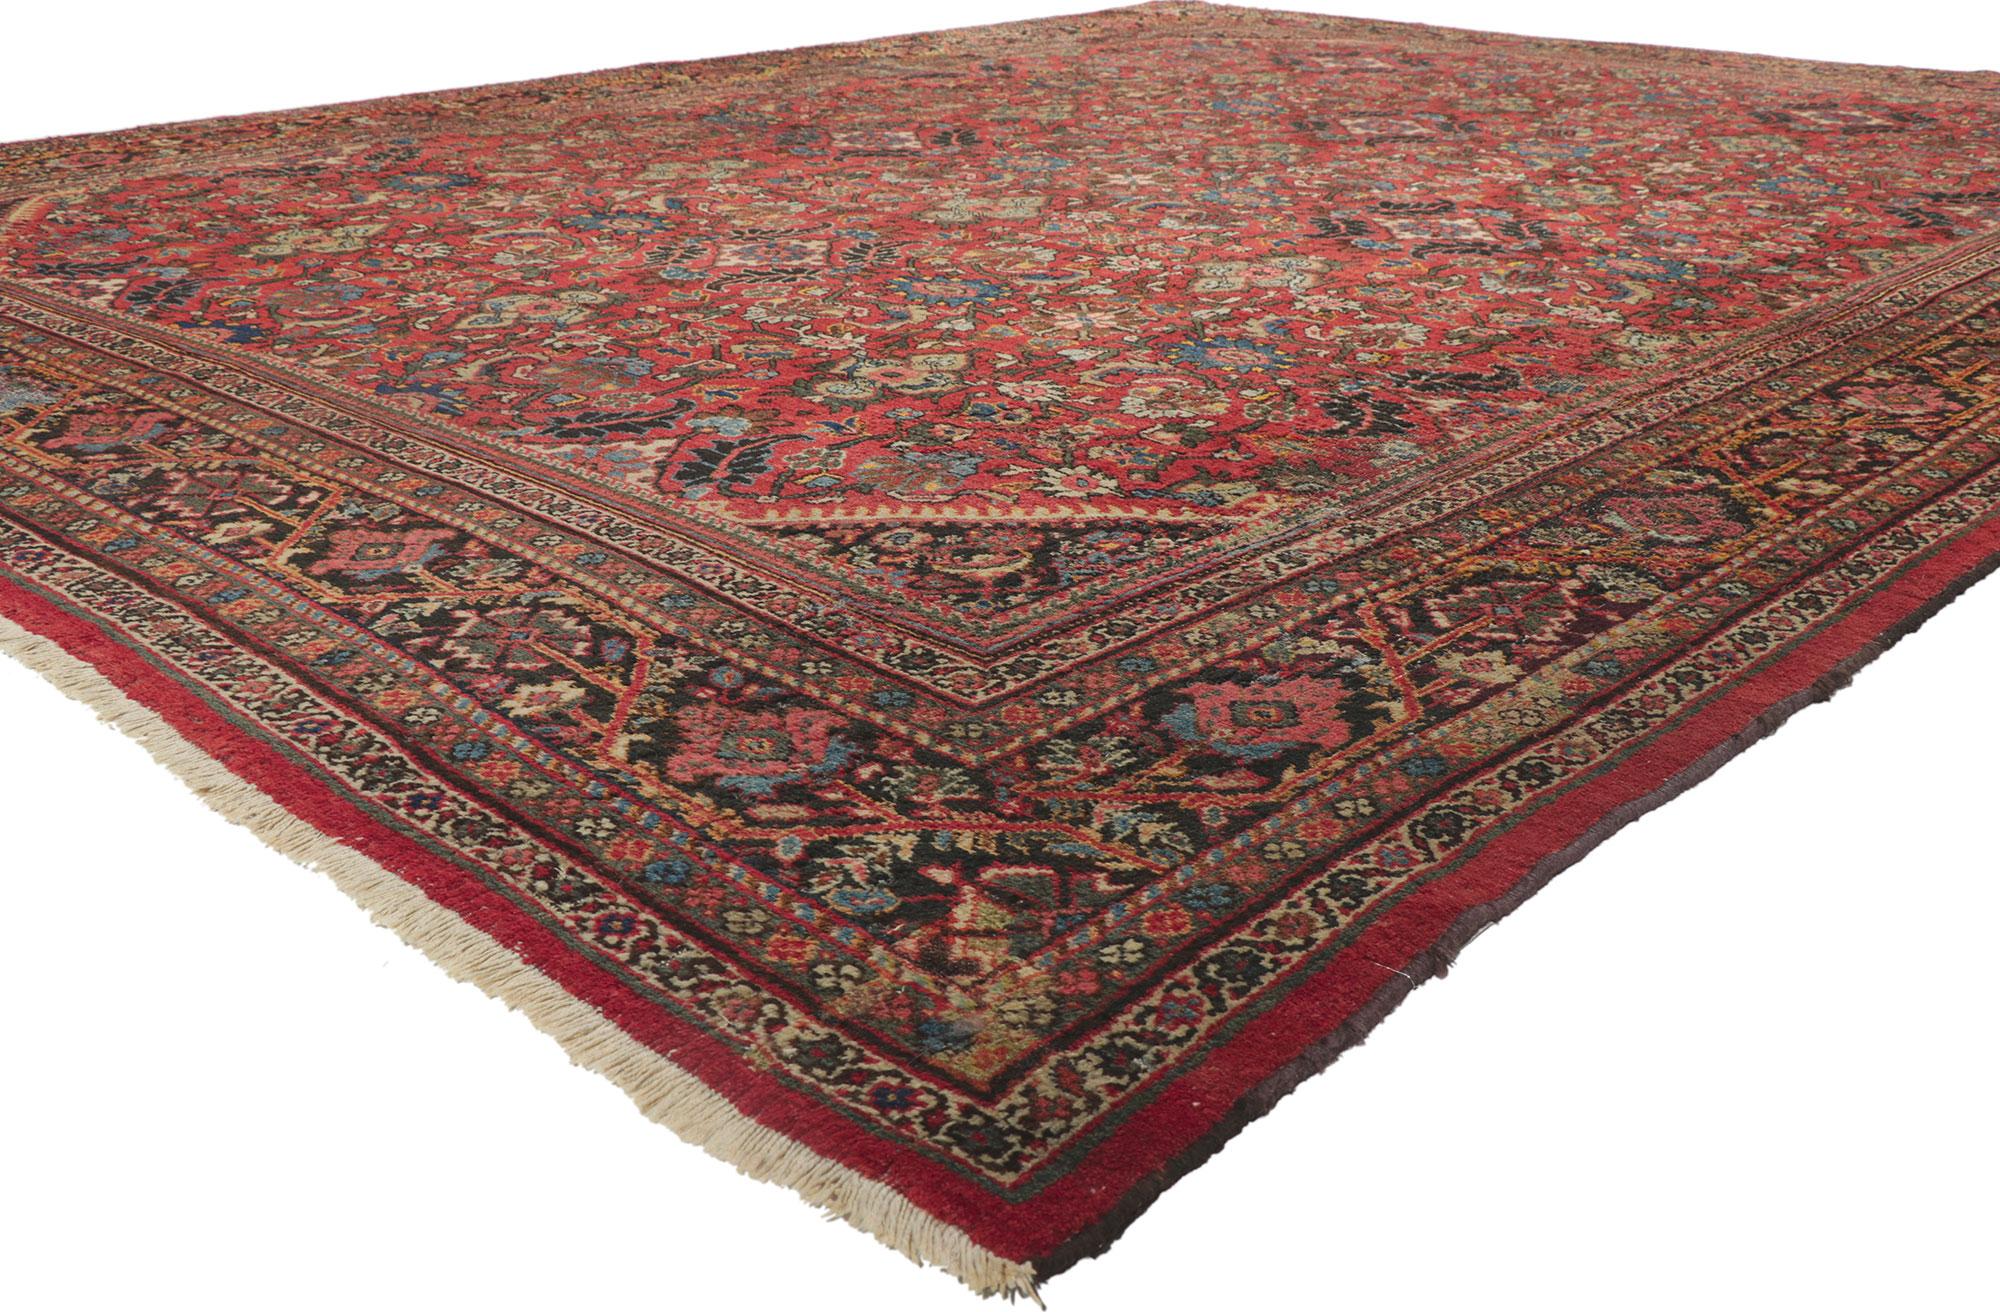 78428 Antique Persian Mahal rug, 11'02 x 14'10.
Emanating timeless style with incredible detail and texture, this hand knotted wool antique Persian Mahal rug is a captivating vision of woven beauty. The eye-catching Herati design and traditional